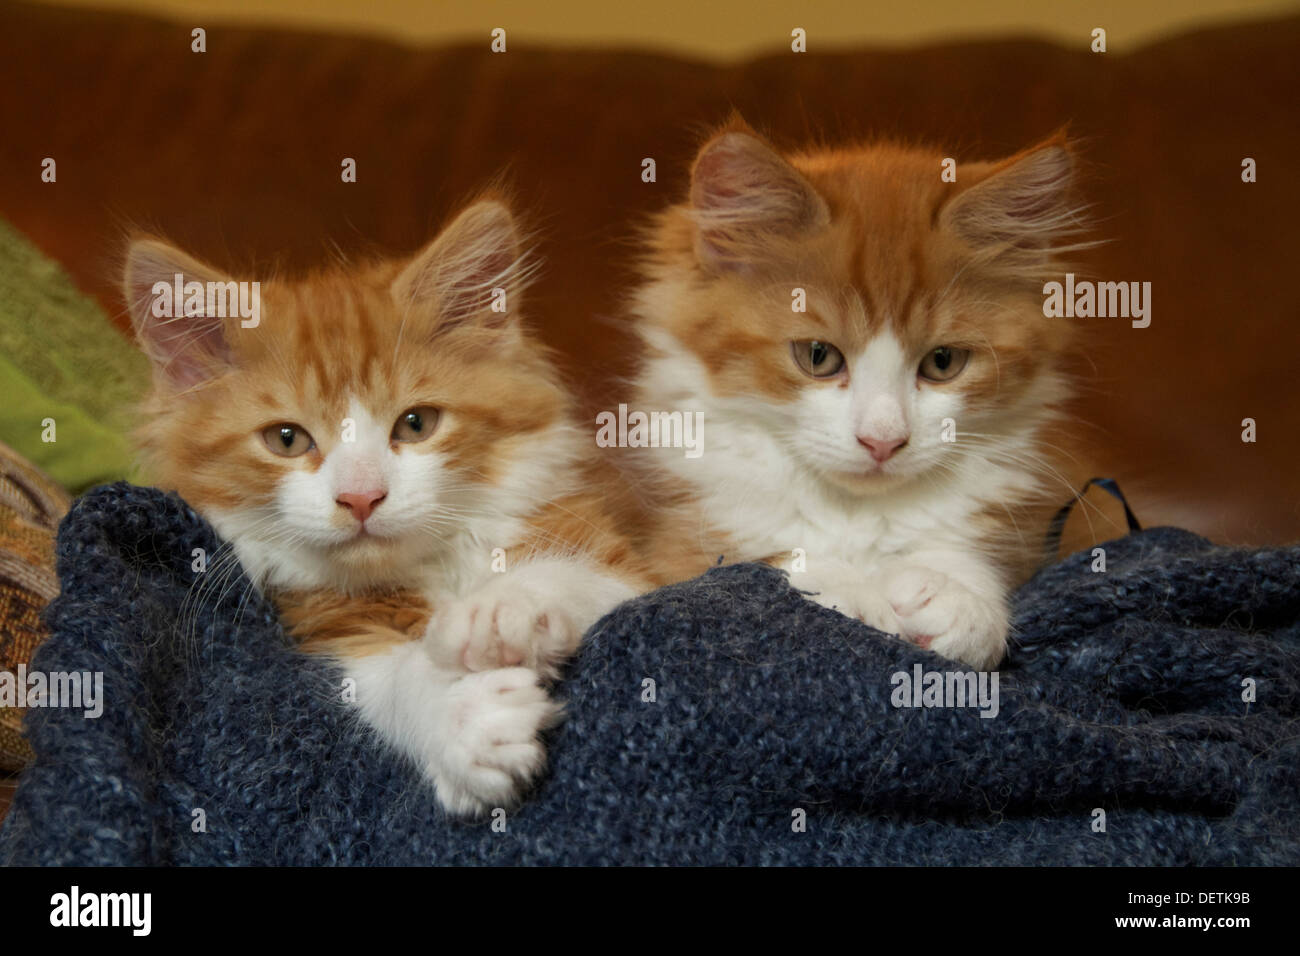 Two, cute and fluffy ginger and white kittens Stock Photo